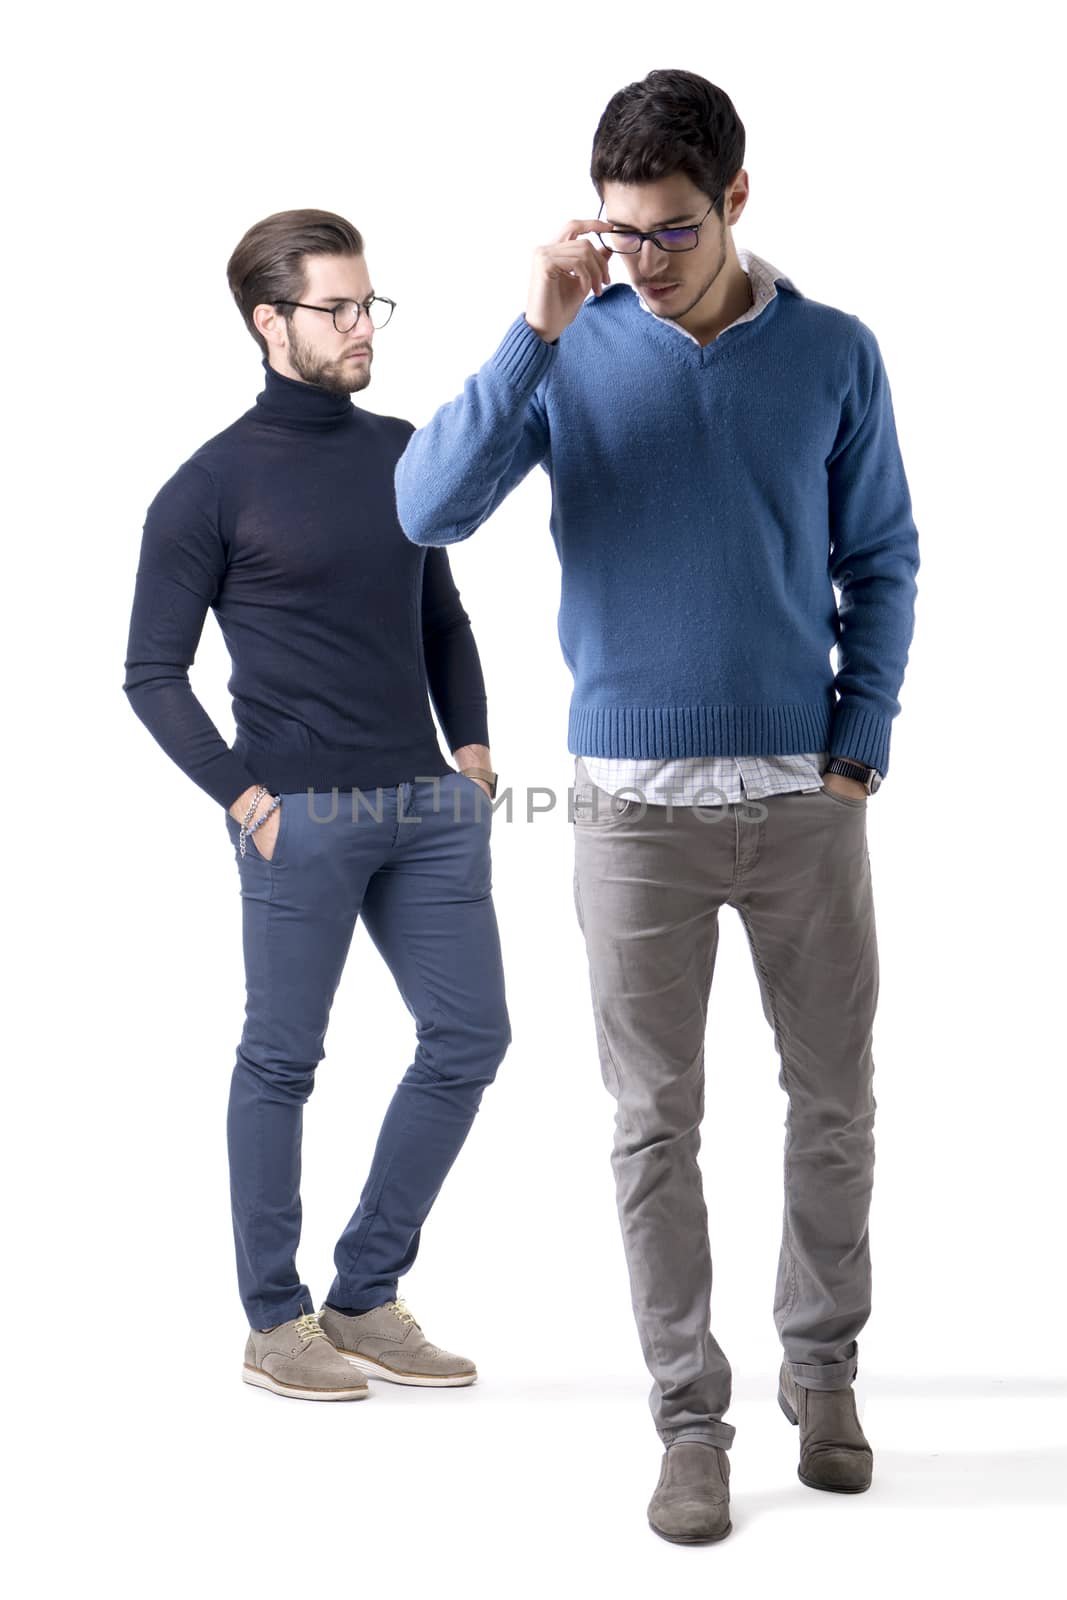 Two good-looking young men with eye-glasses in stylish clothes. Full figure studio shot, isolated on white